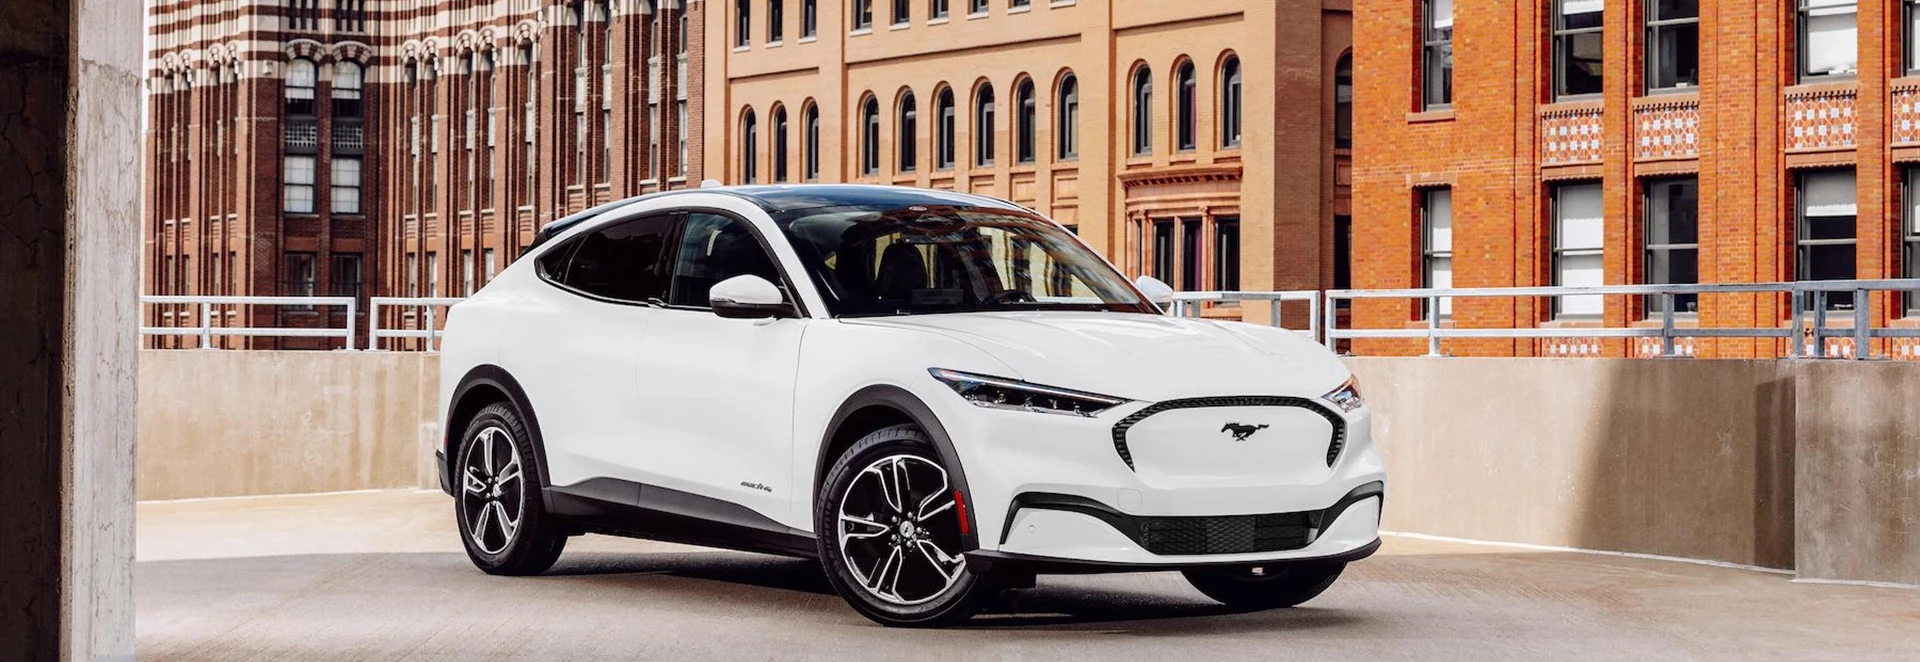 10 cars to get excited about in 2021 